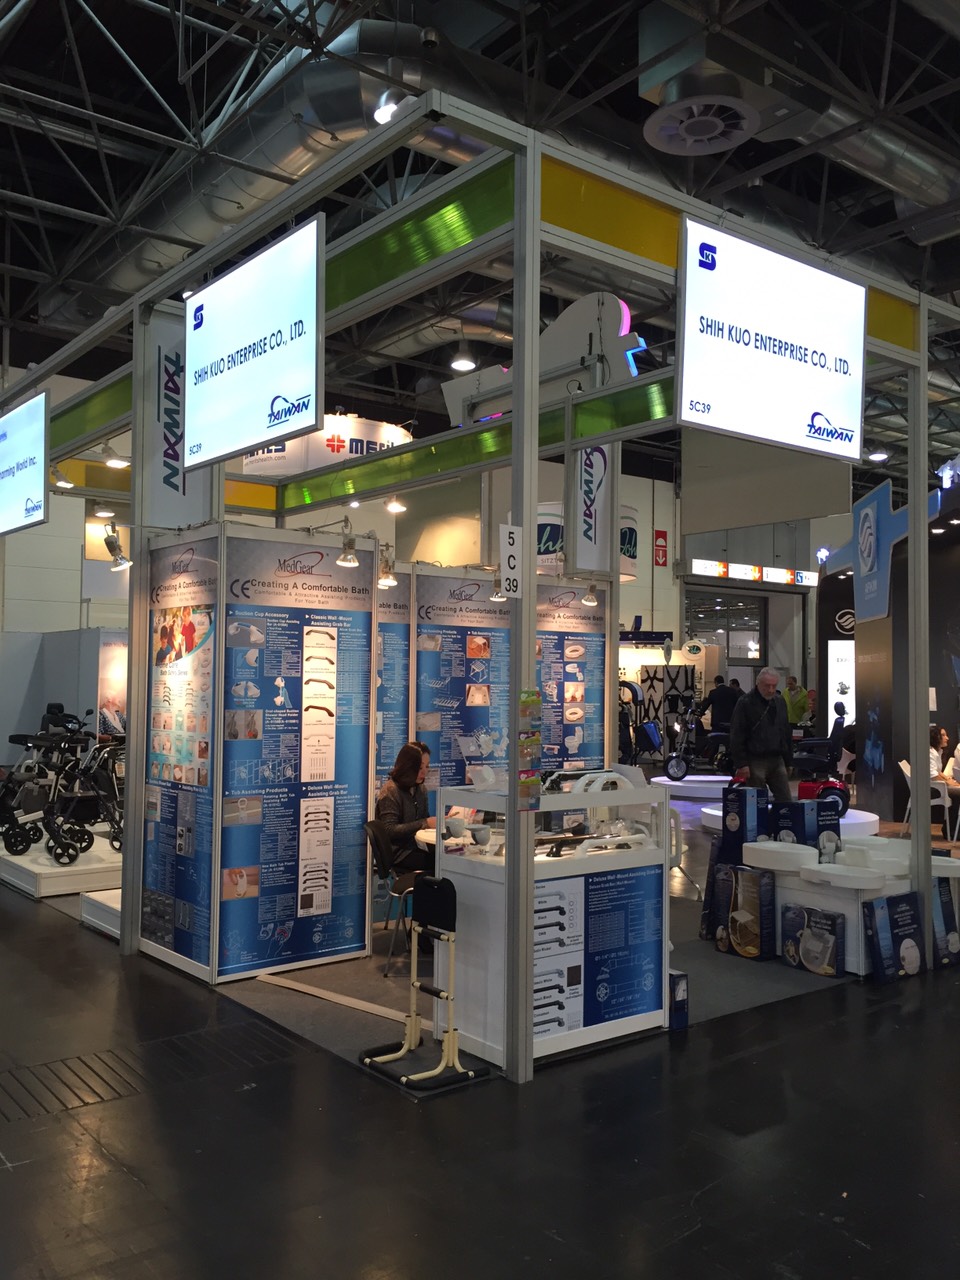 2015/10/14~10/17 Germany REHACARE 2015 Exhibition Highlights